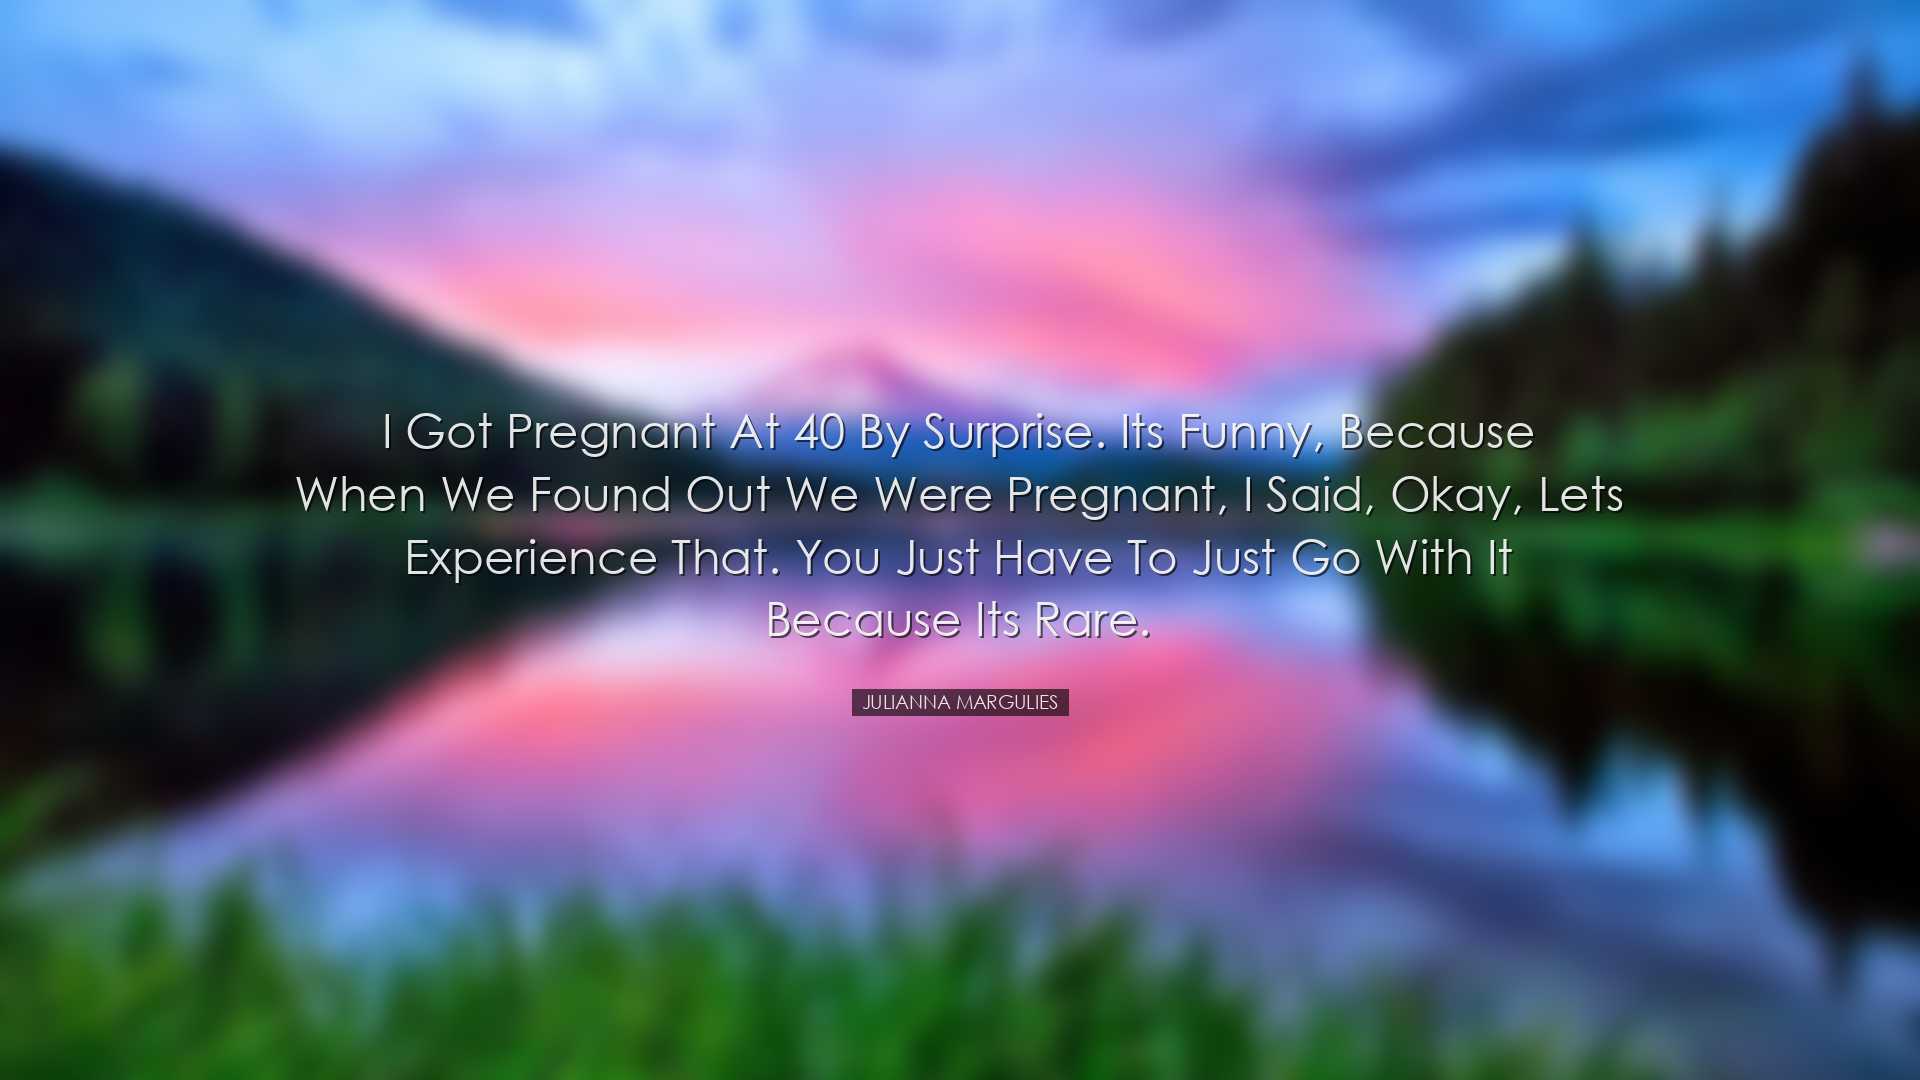 I got pregnant at 40 by surprise. Its funny, because when we found